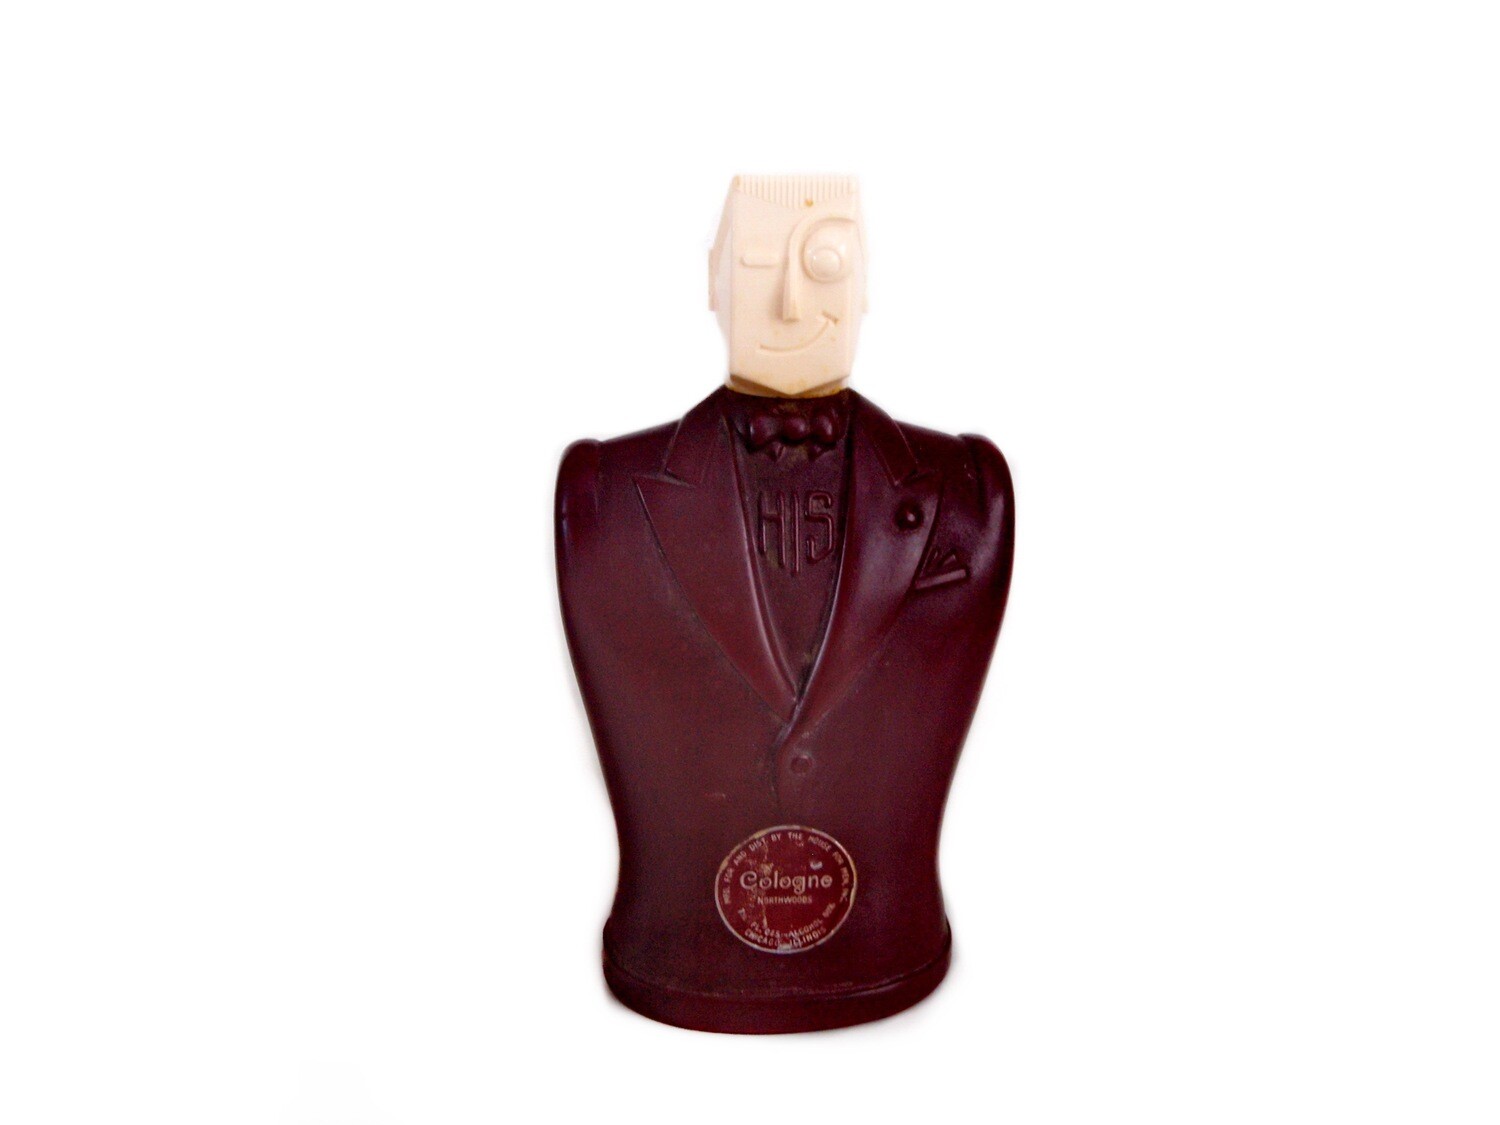 HIS Northwoods Mens Cologne 1940s Scent Bottle